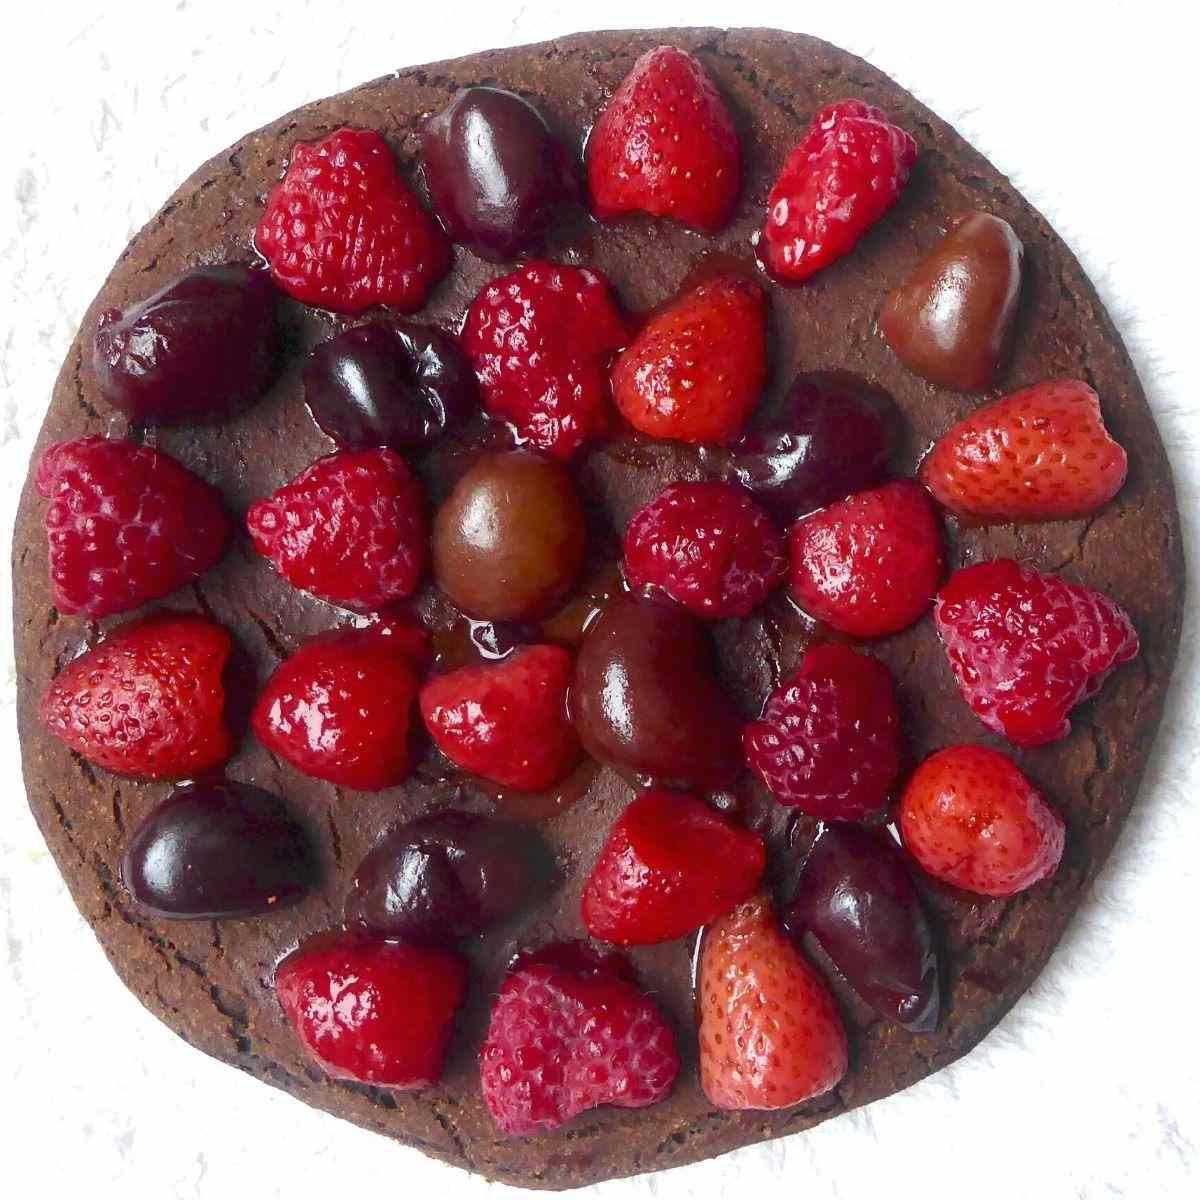 aerial view of chocolate pancake with berries on top